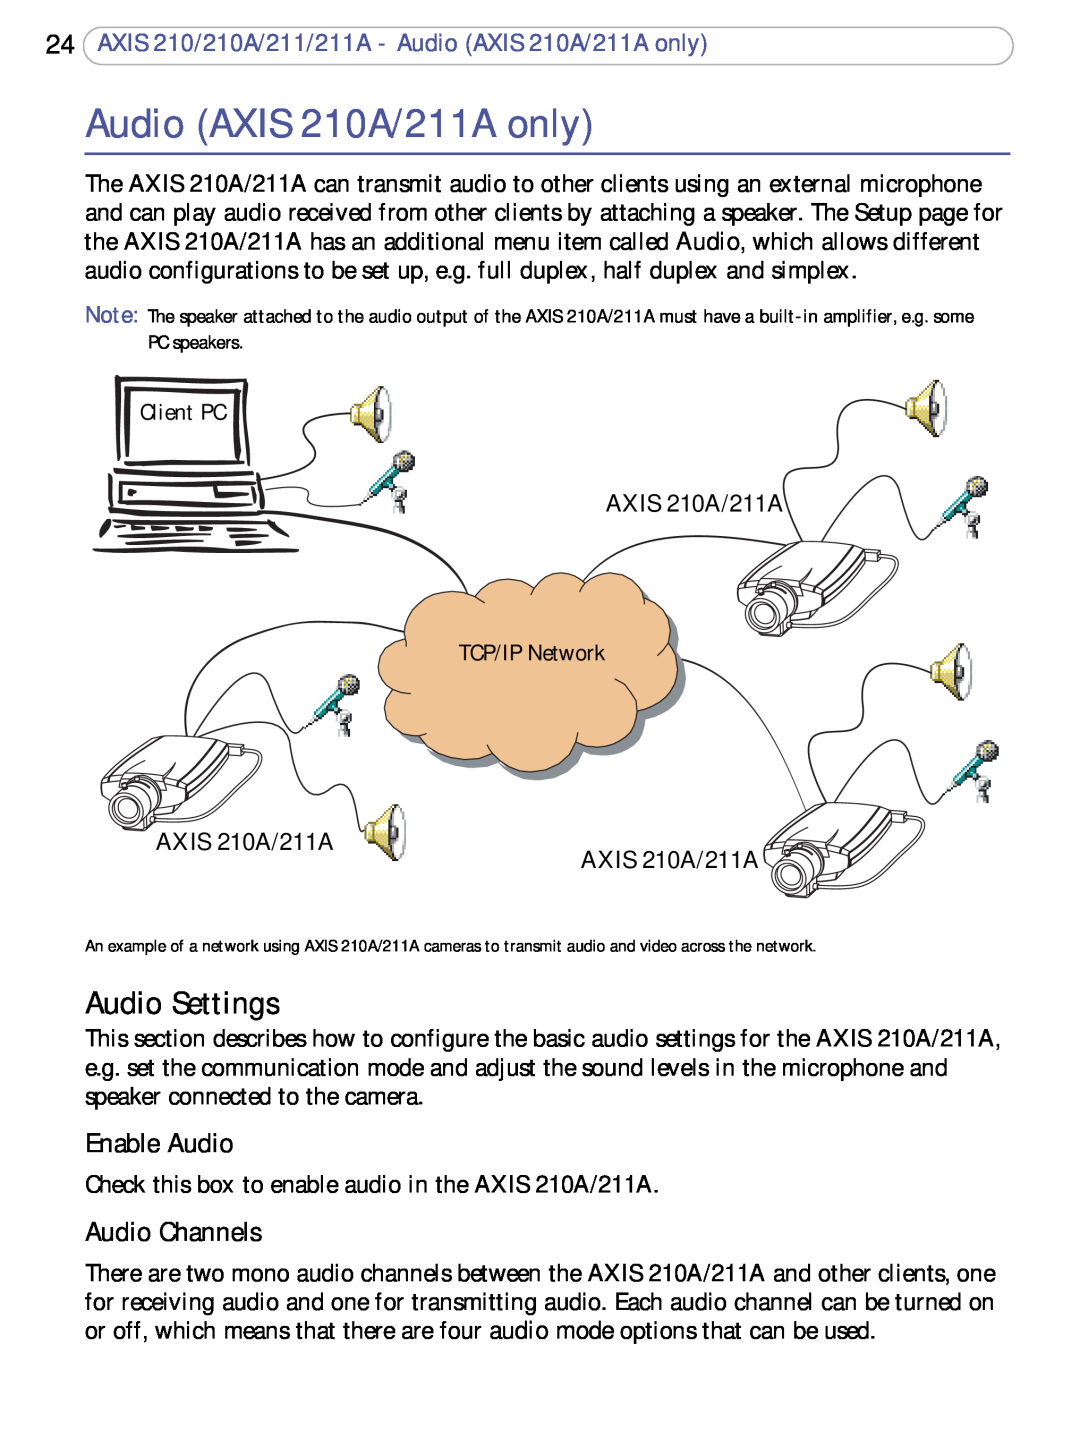 Axis Communications 211a user manual Audio AXIS 210A/211A only, Audio Settings, Enable Audio, Audio Channels 